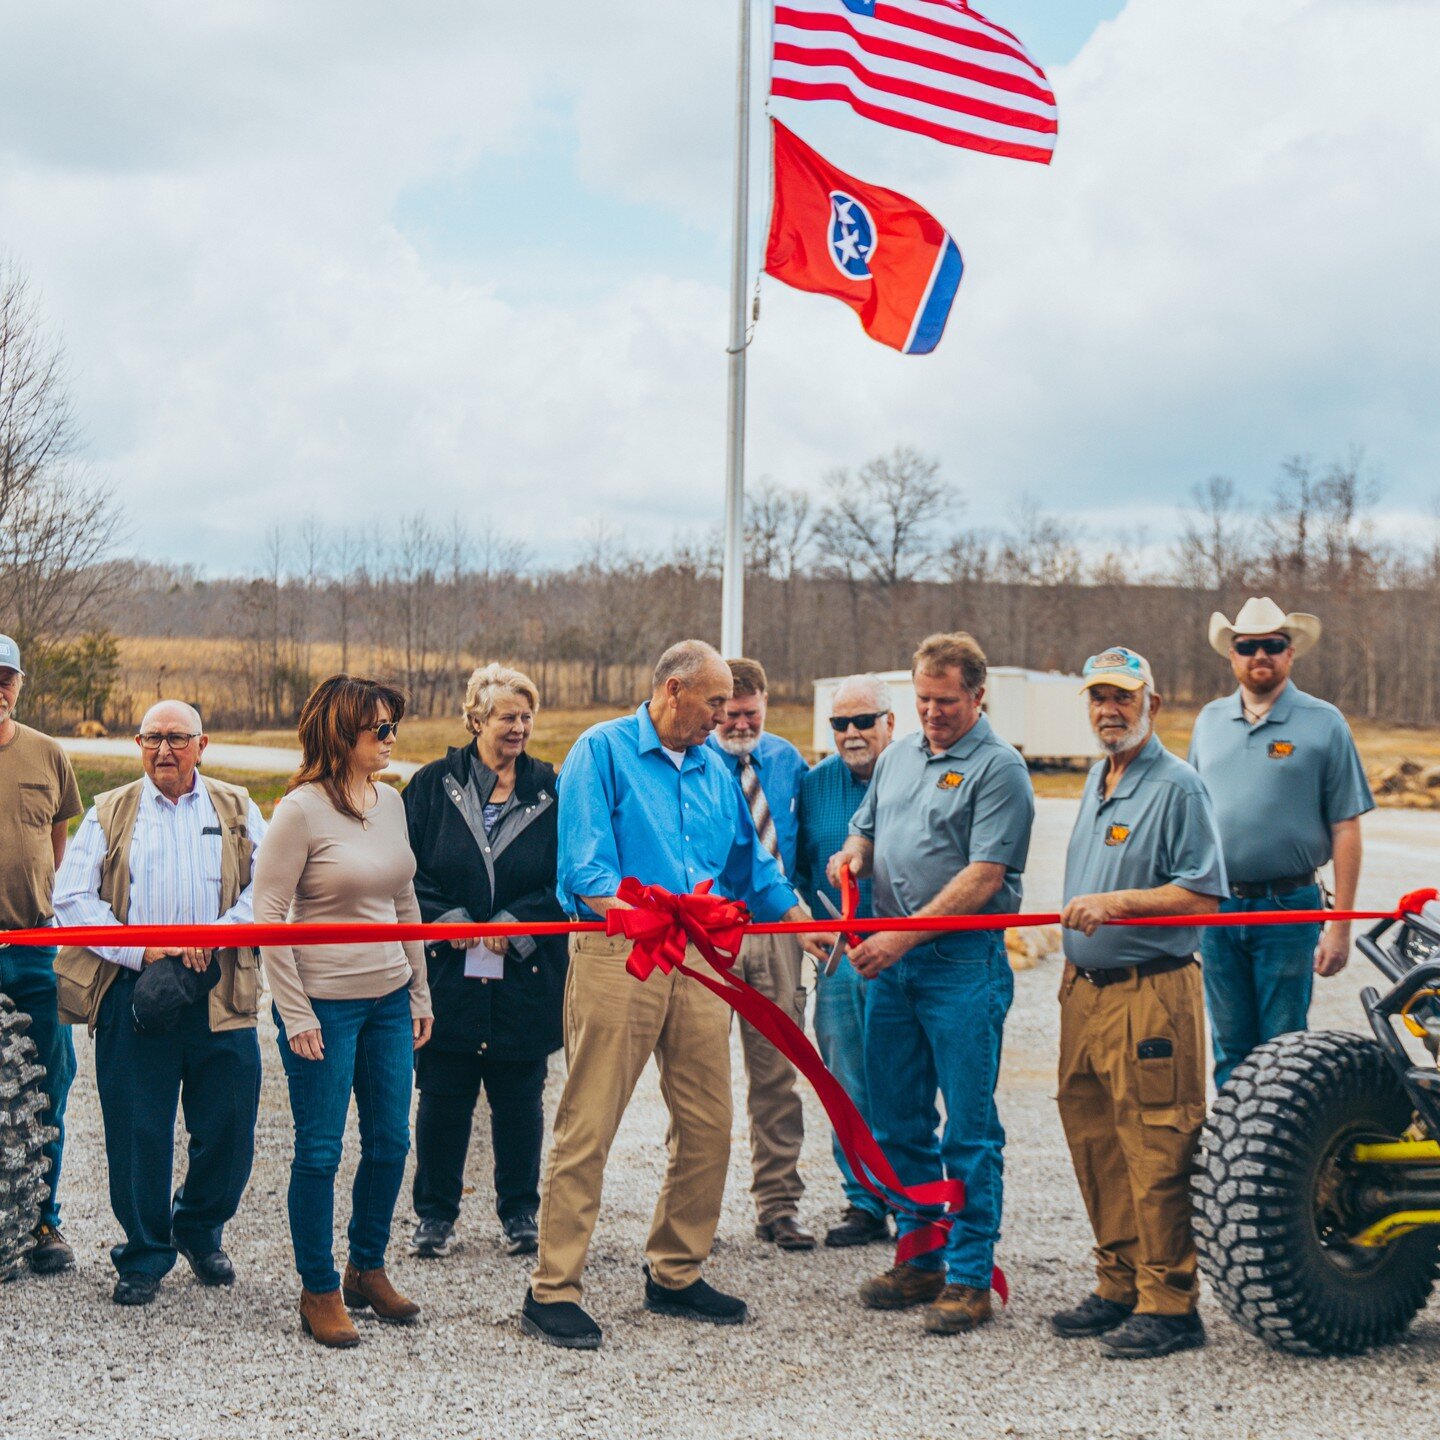 Friday was a truly special day for Coalmont OHV Park! We officially opened our doors with a ribbon cutting ceremony, attended by dozens of excited off-road enthusiasts, community members, and also, local and state officials. We couldn't have asked fo